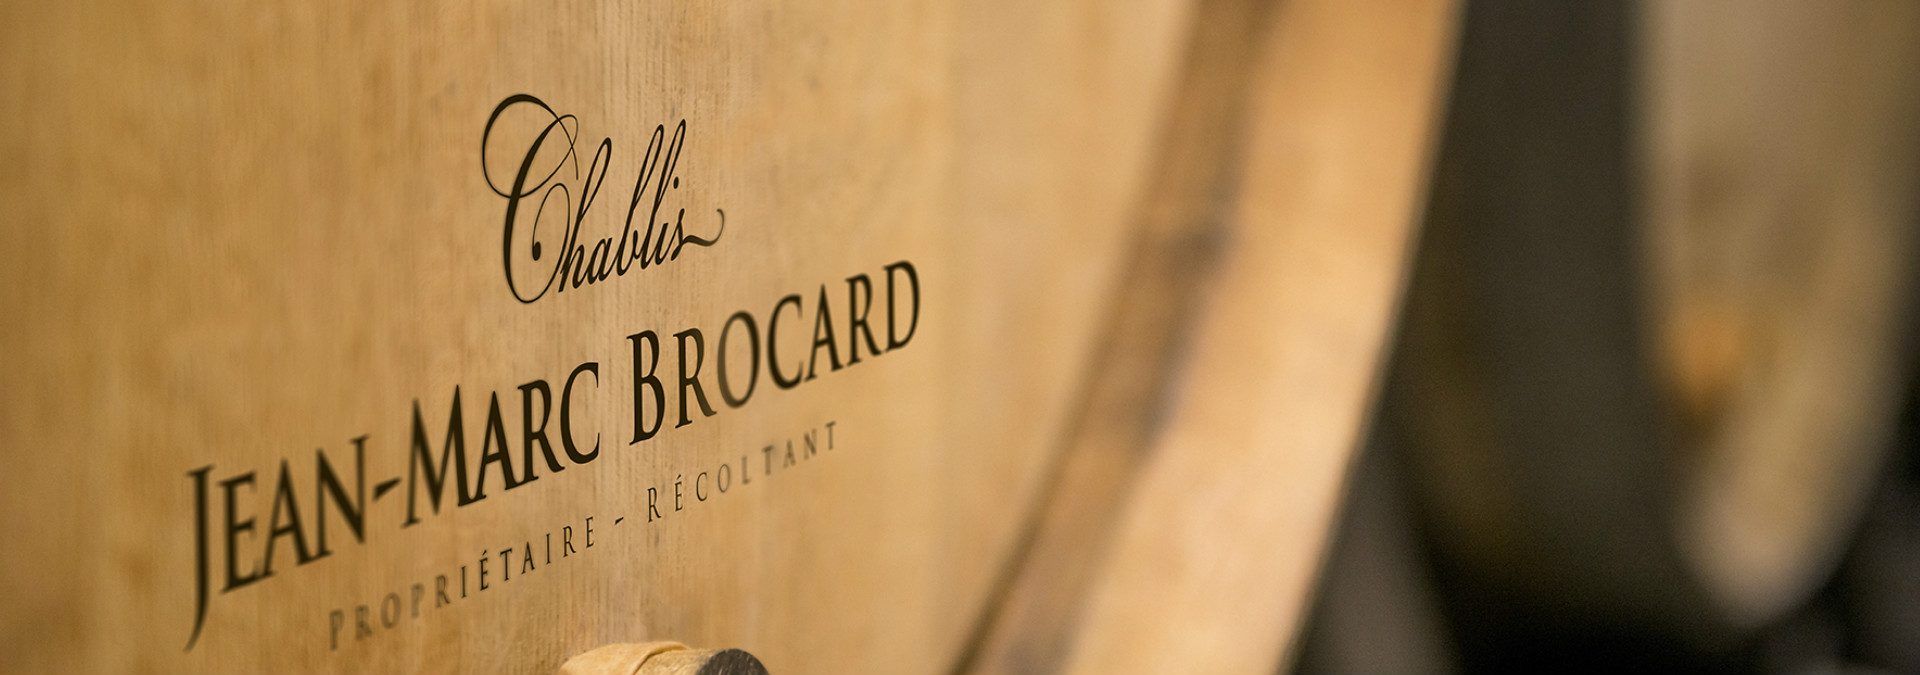 Domaine Famille Brocard